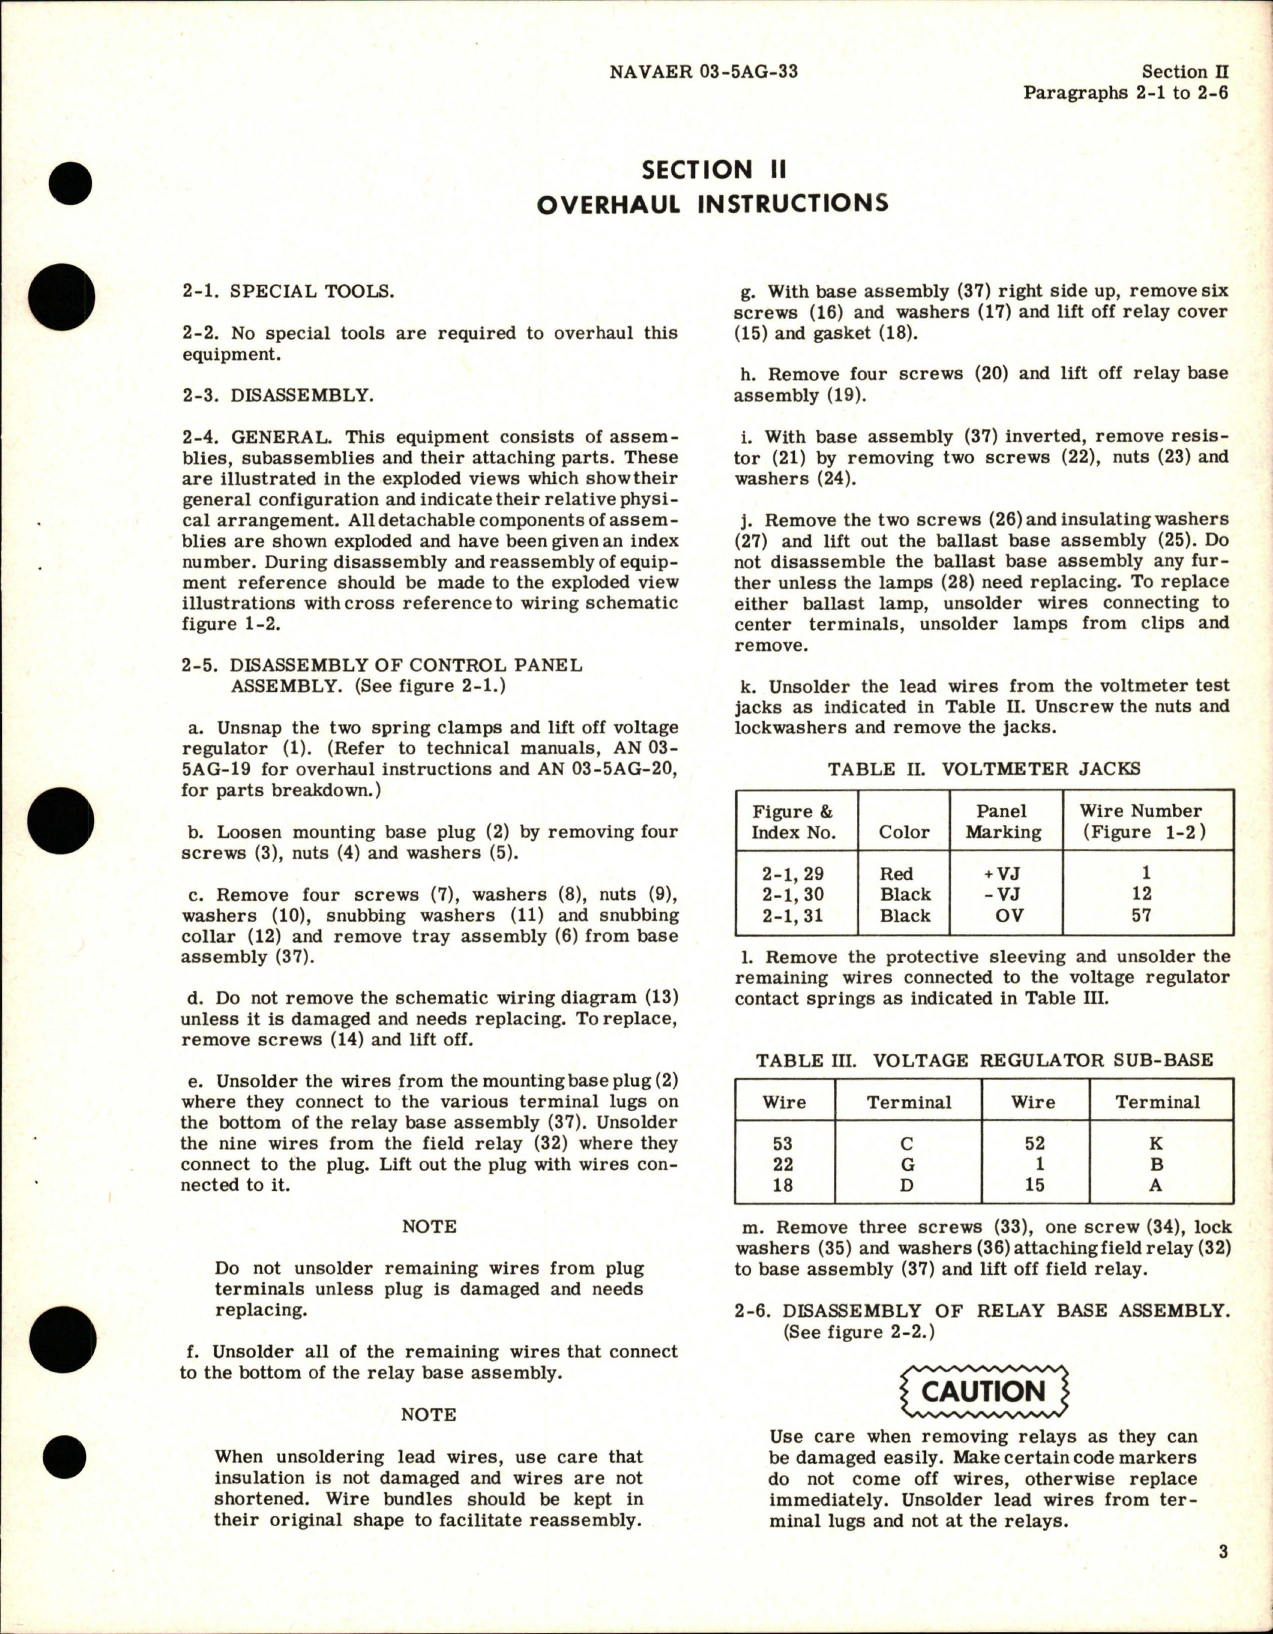 Sample page 7 from AirCorps Library document: Overhaul Instructions for Control Panel - Model GC34-1